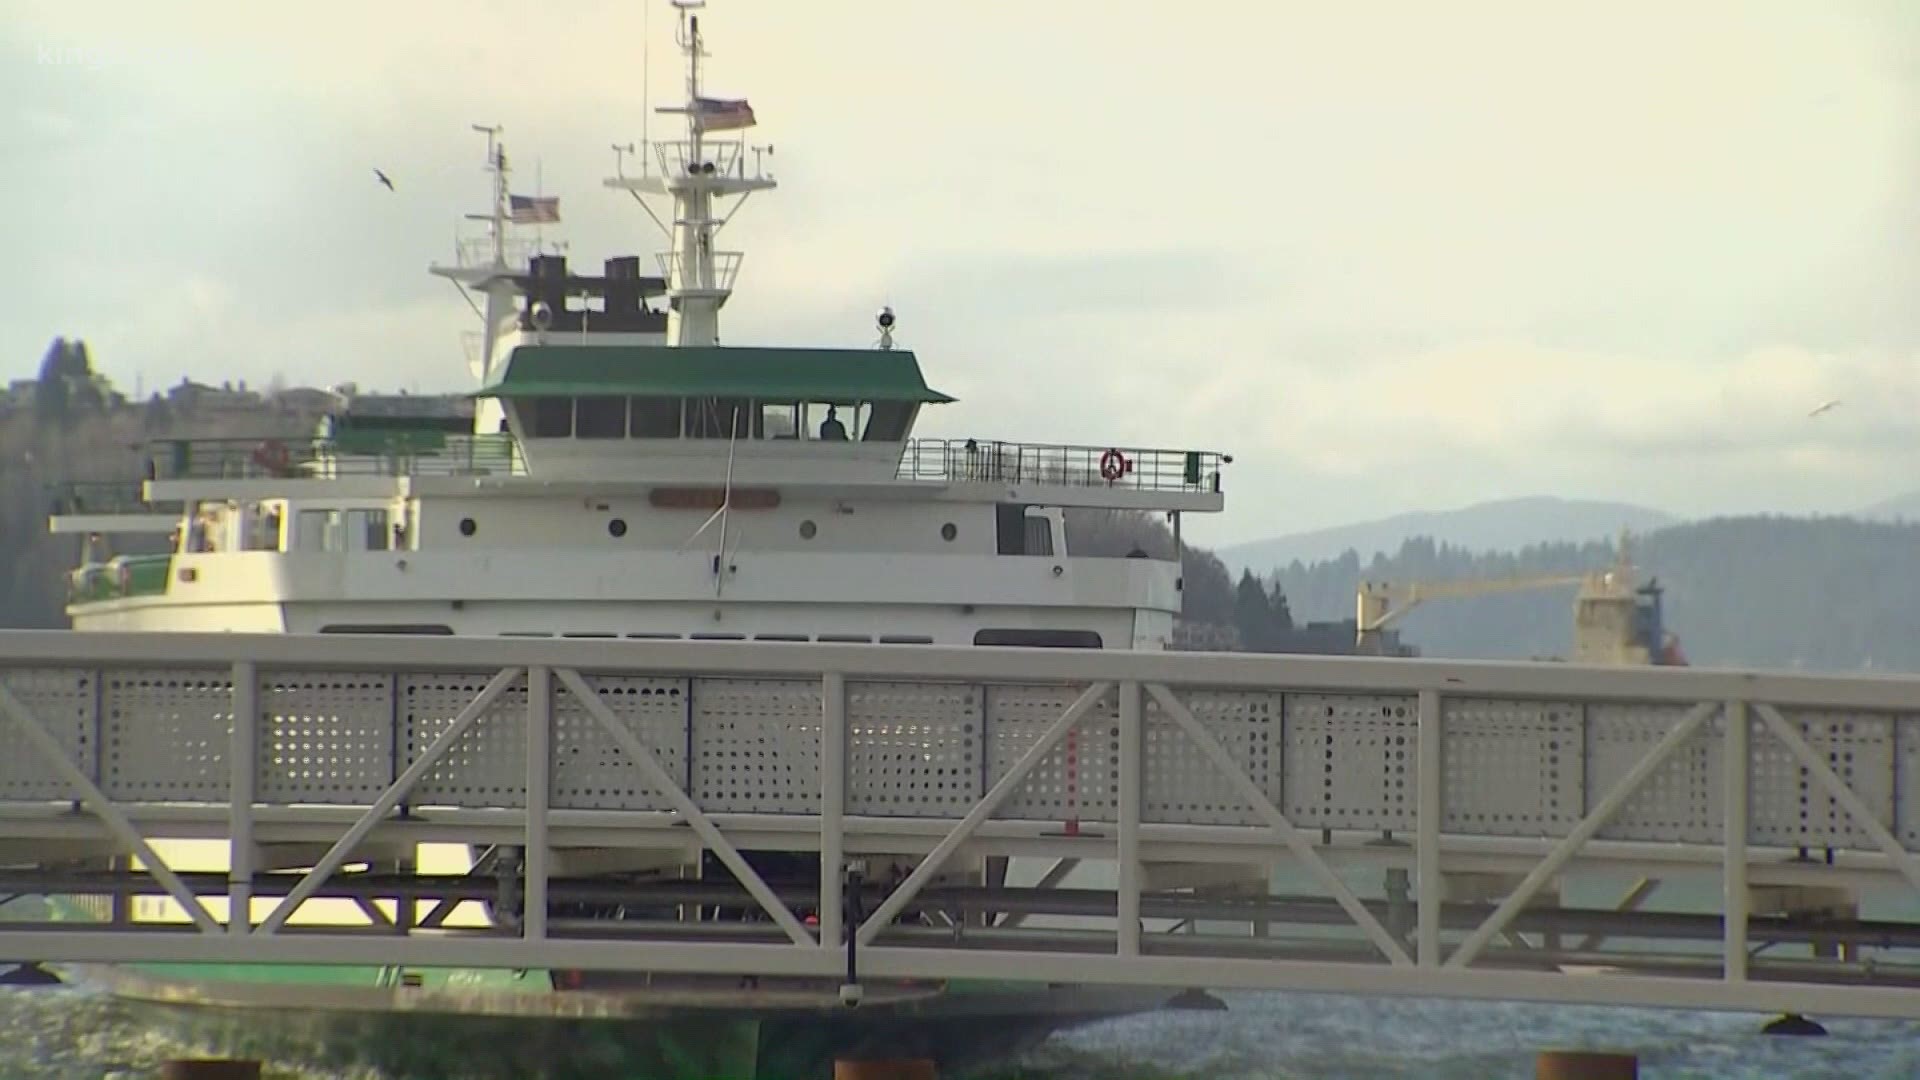 The Bremerton-Seattle state ferry crossing will be down to one-boat service “until further notice” because of a propulsion issue found on the ferry Cathlamet.